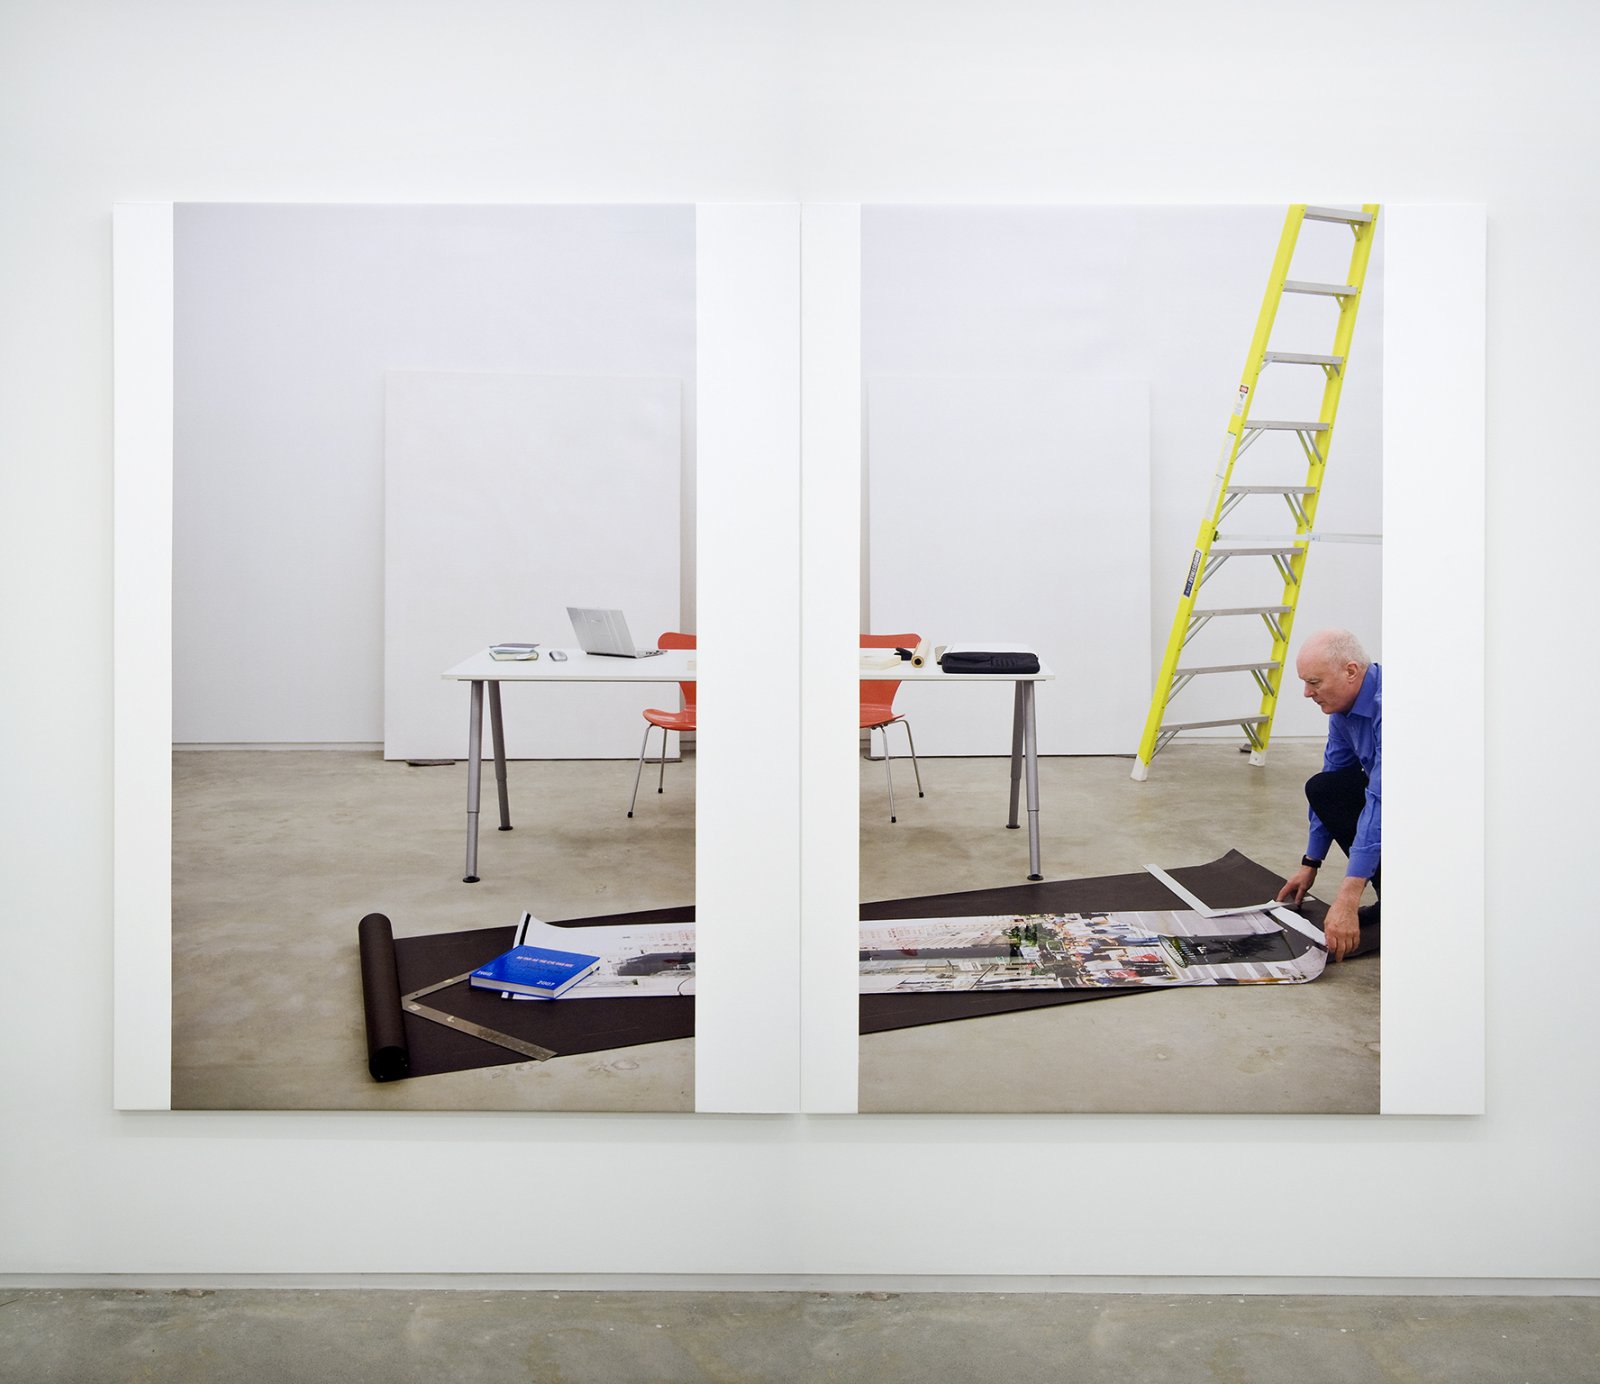 Ian Wallace, At Work 2008, 2008, photolaminate with acrylic on canvas diptych panels, 80 x 120 in. (203 x 305 cm)